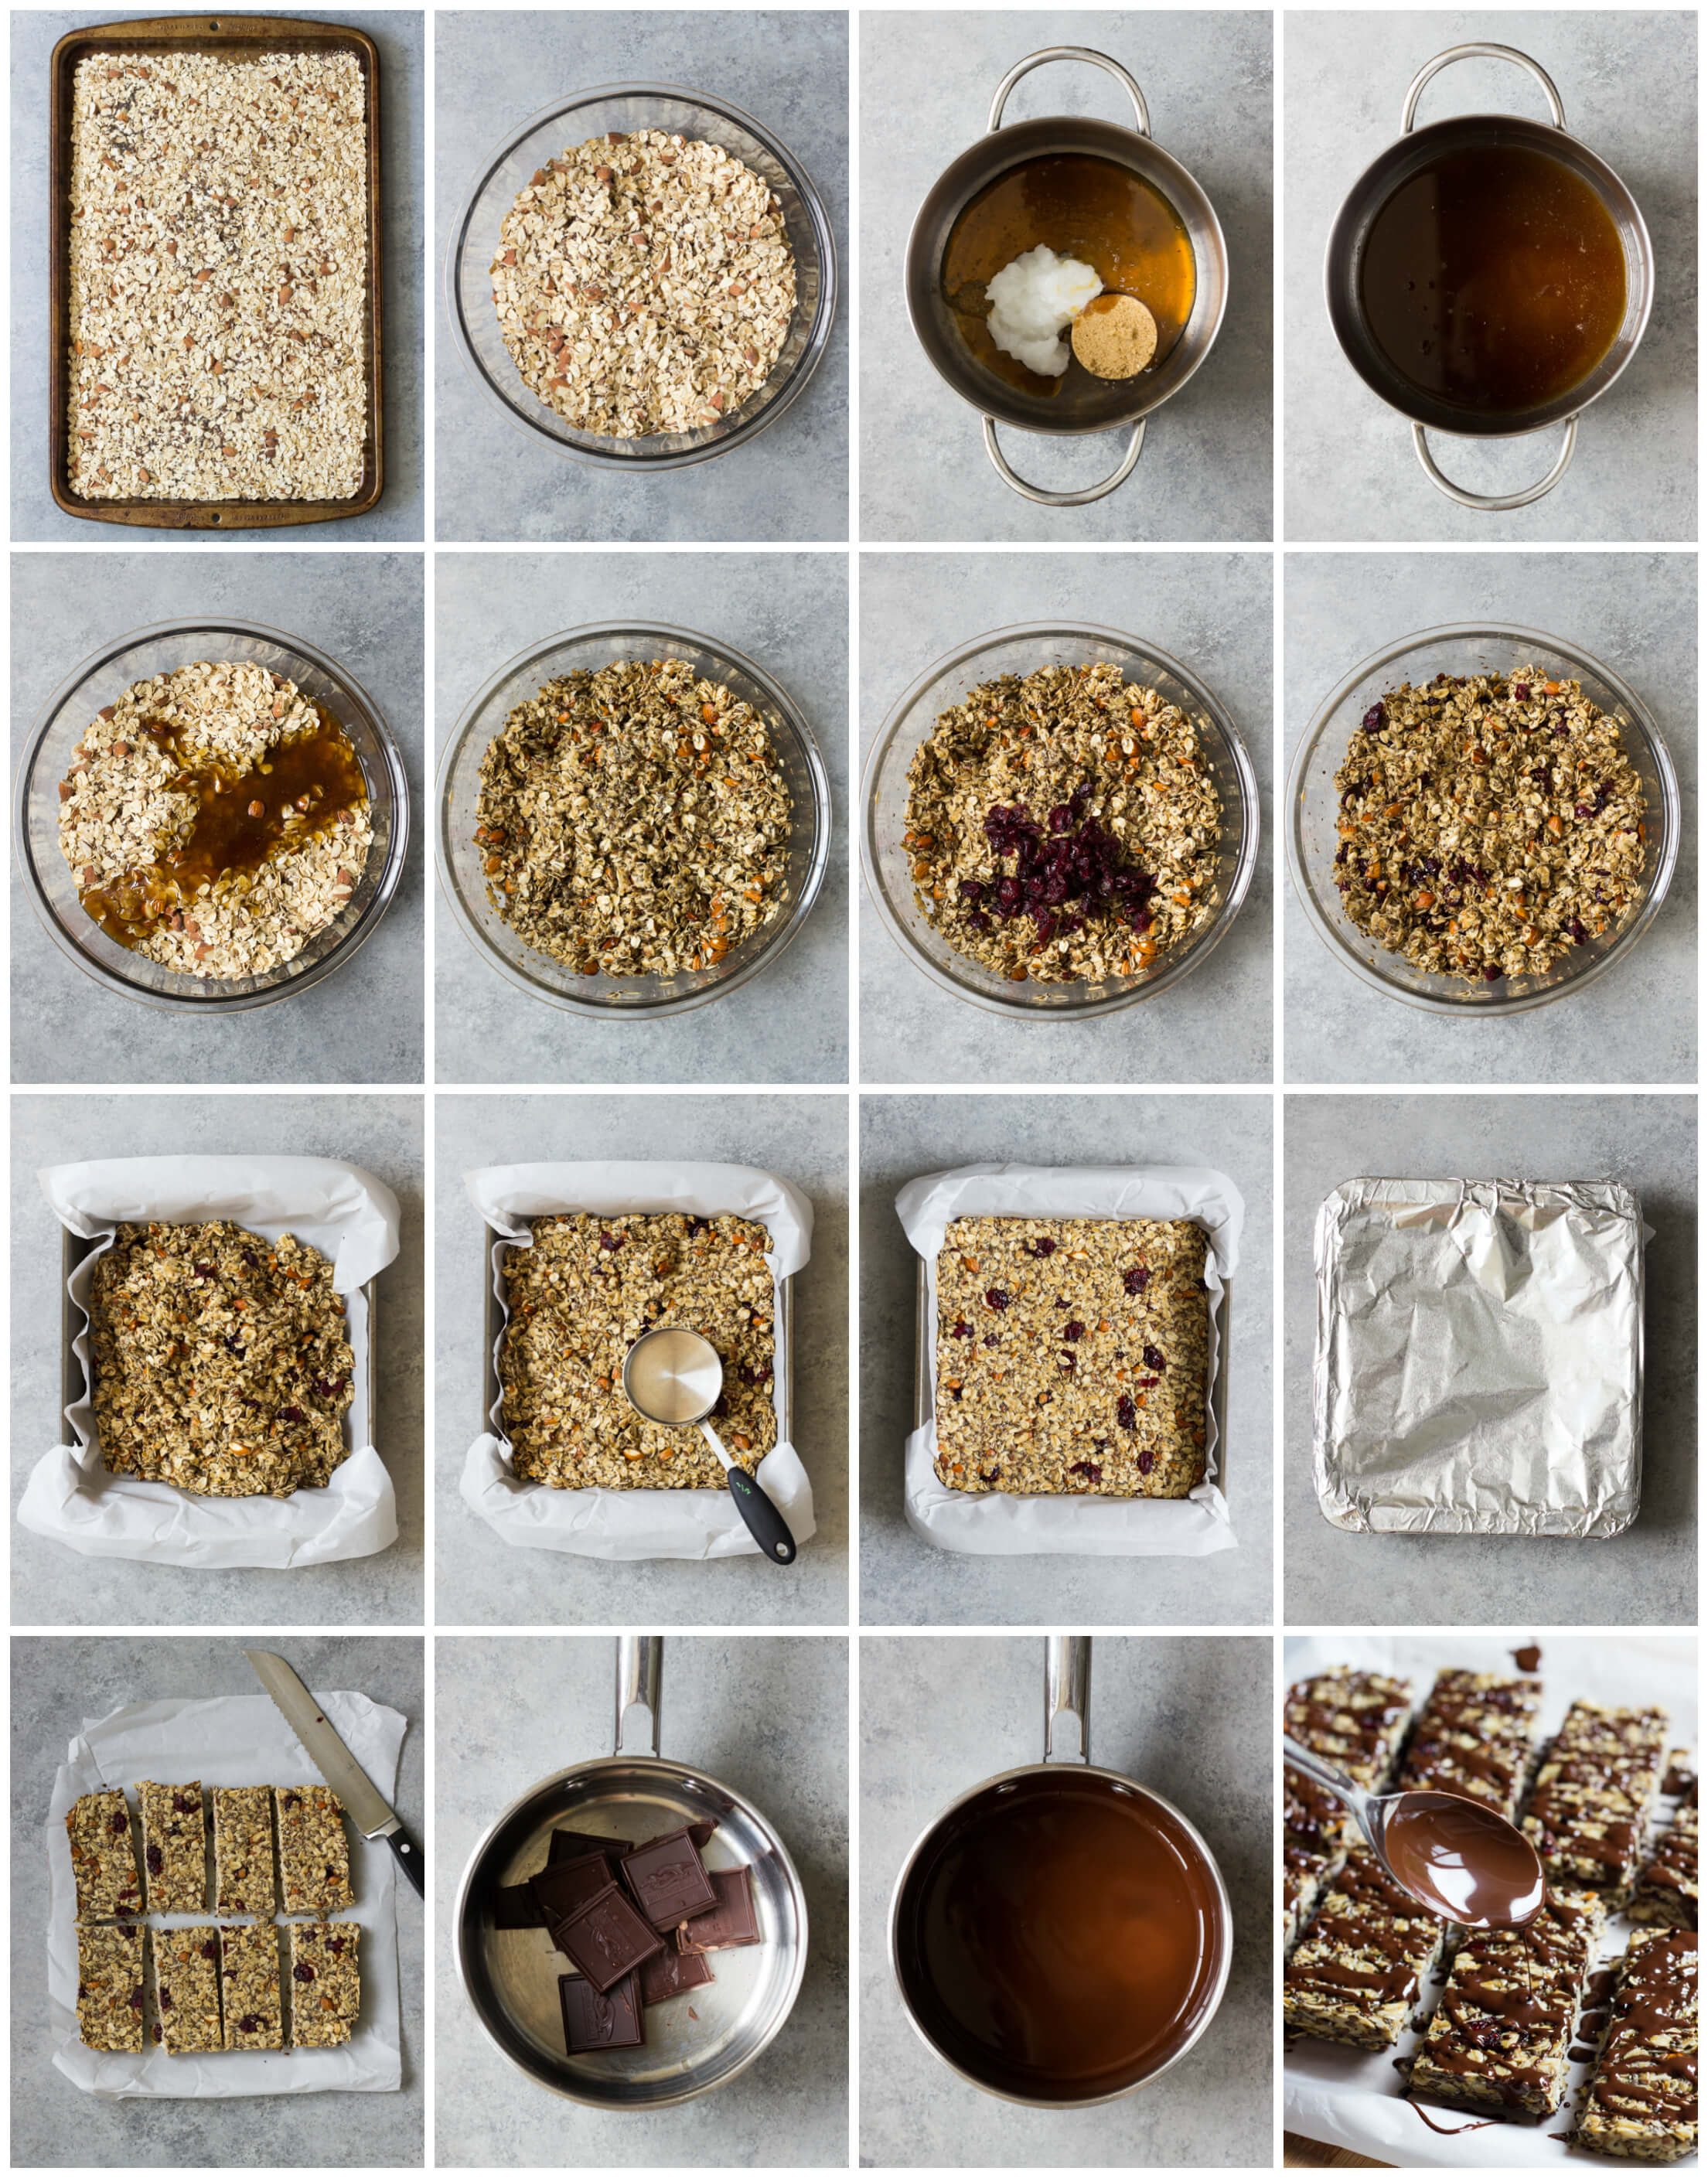 Soft and Chewy Granola Bars - made with wholesome good for you ingredients. These granola bars are perfect for school lunches, breakfast on the go, or healthy snack | littlebroken.com @littlebroken